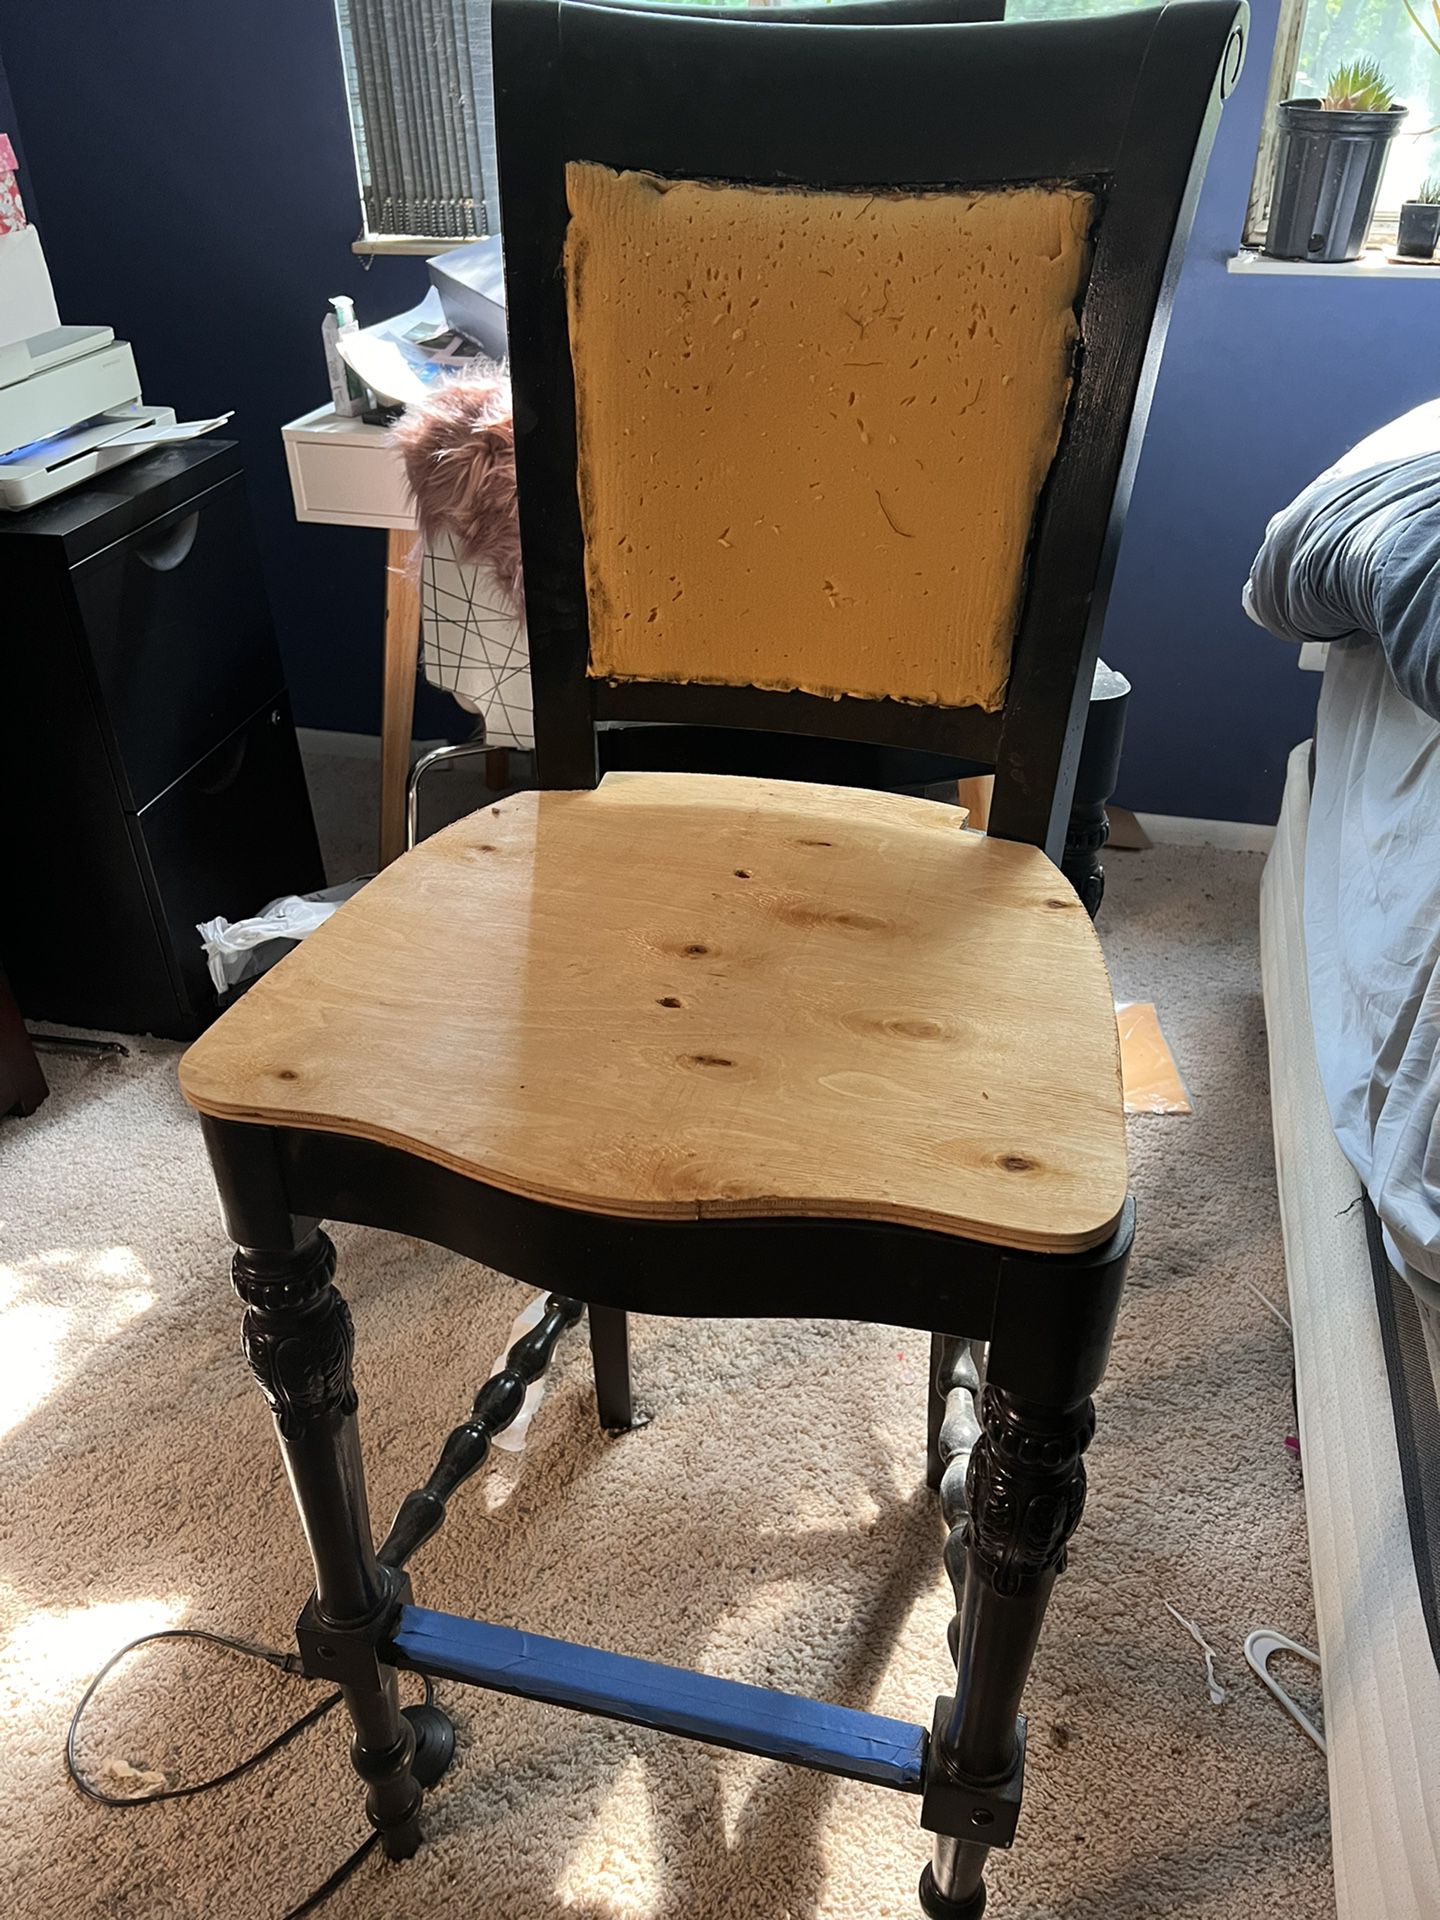 (2) Solid Wood Bar Chairs Need Upholstery Work